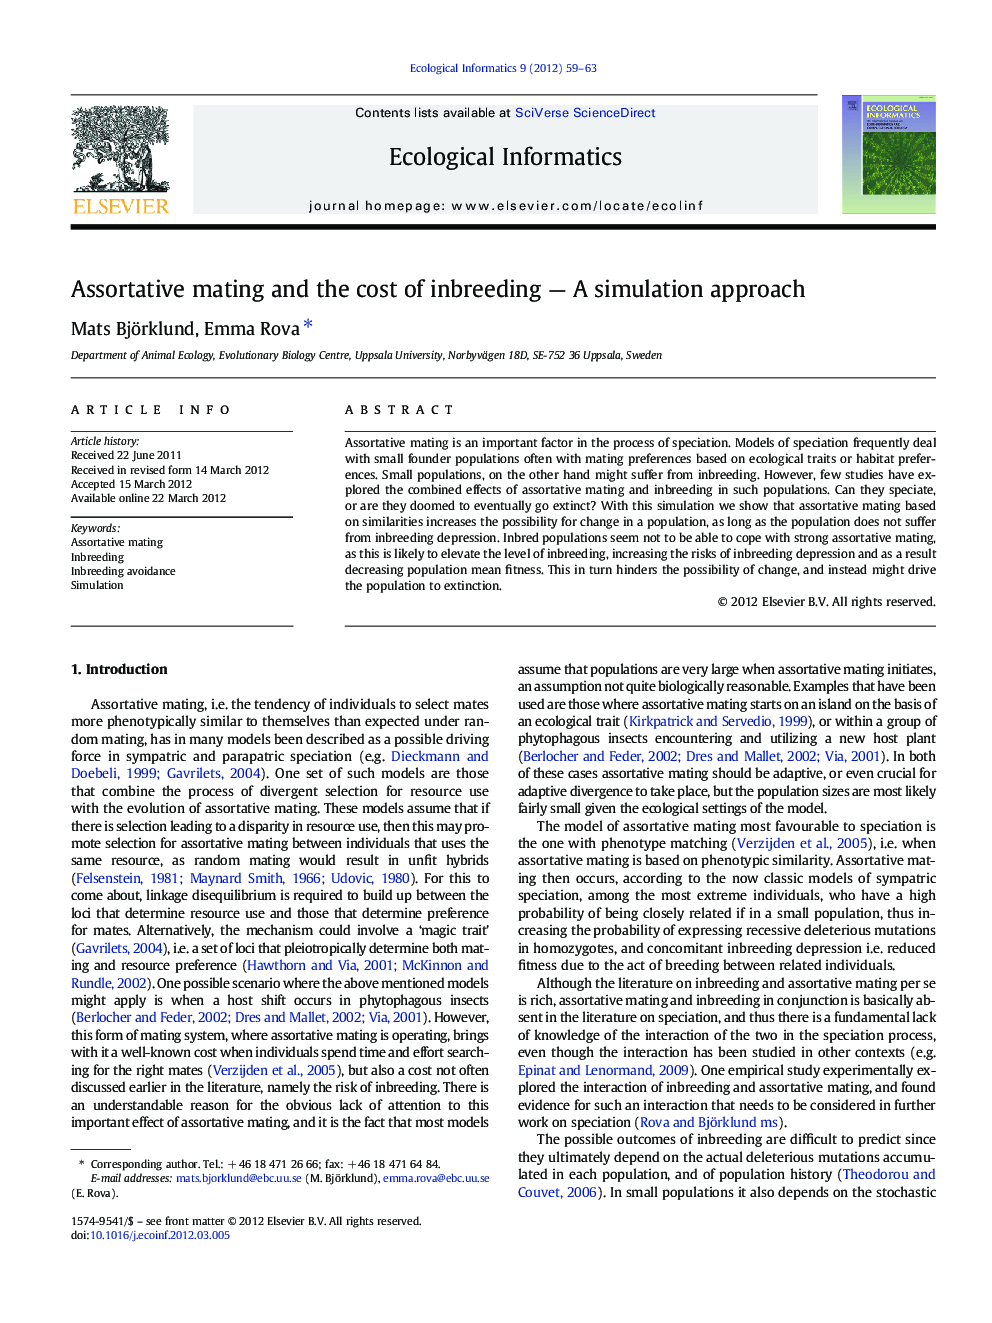 Assortative mating and the cost of inbreeding - A simulation approach